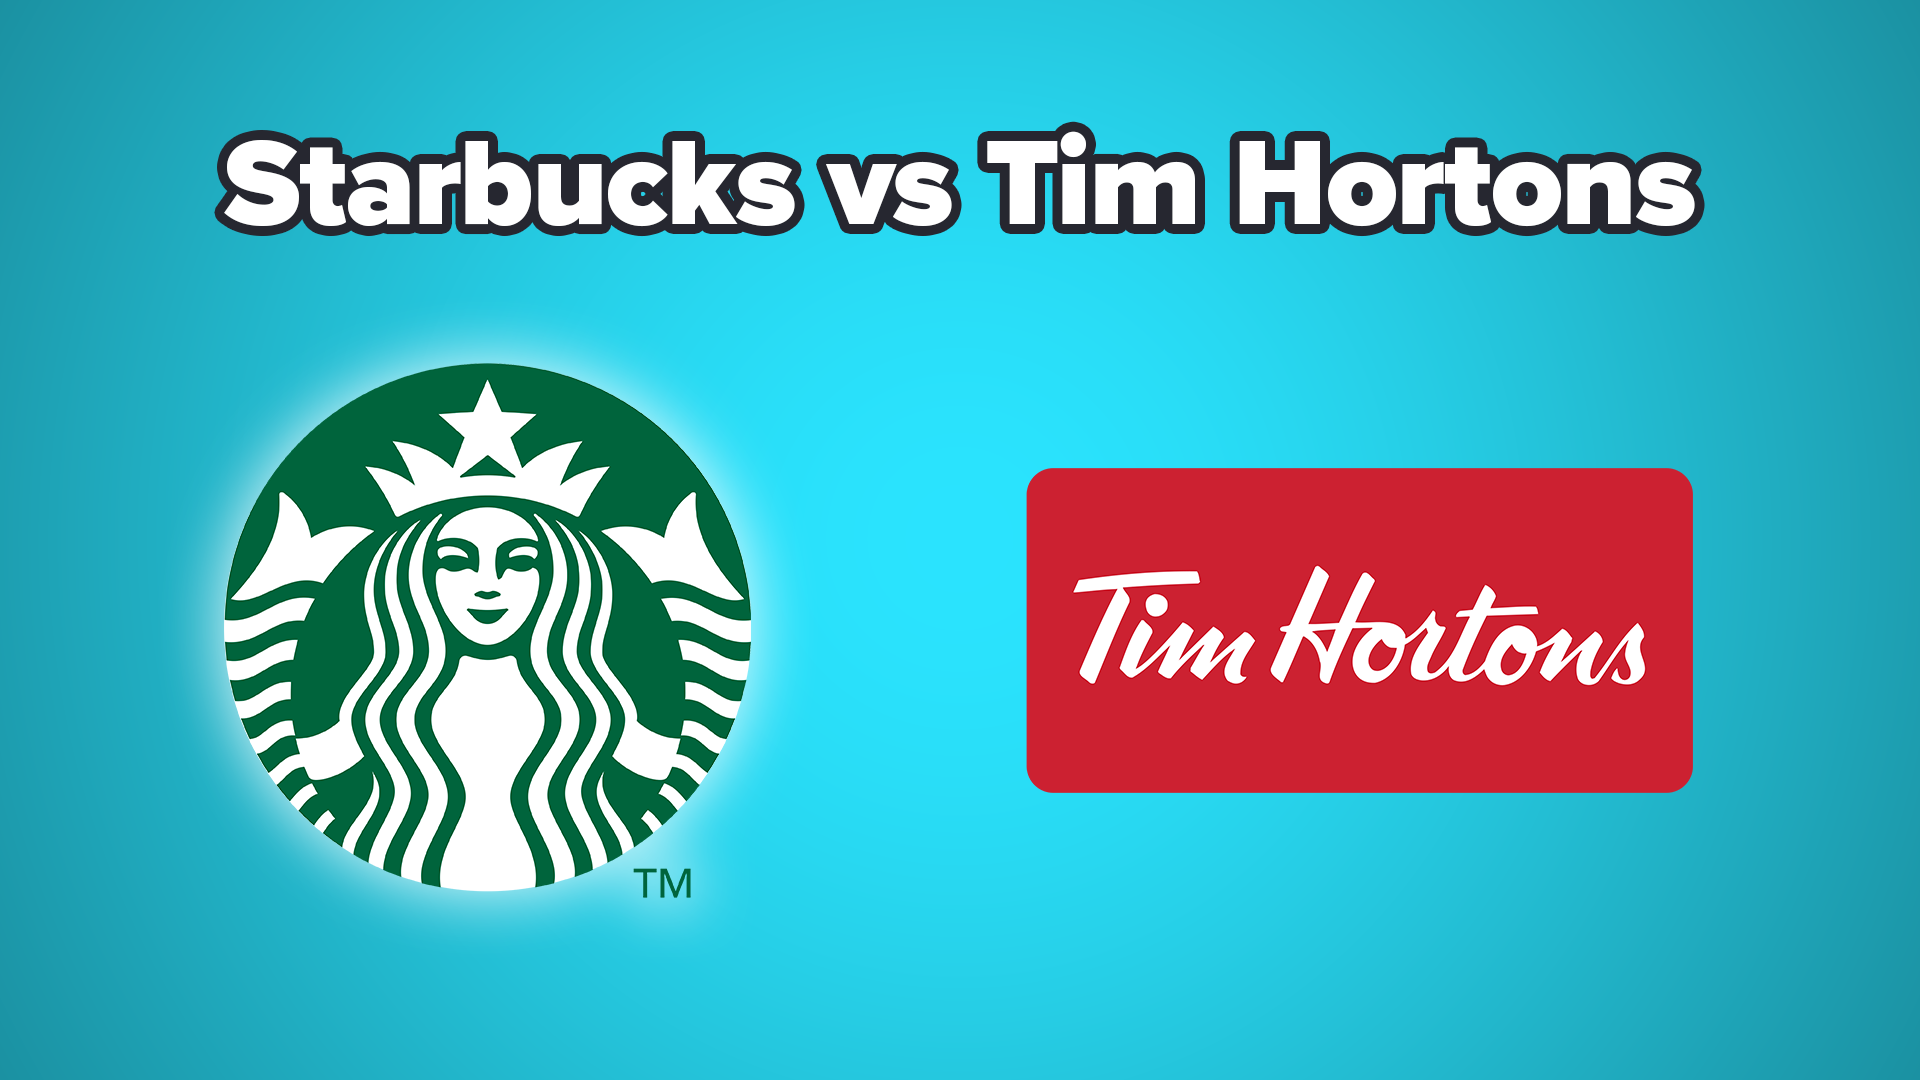 Tim Hortons logo and branding - Fonts In Use